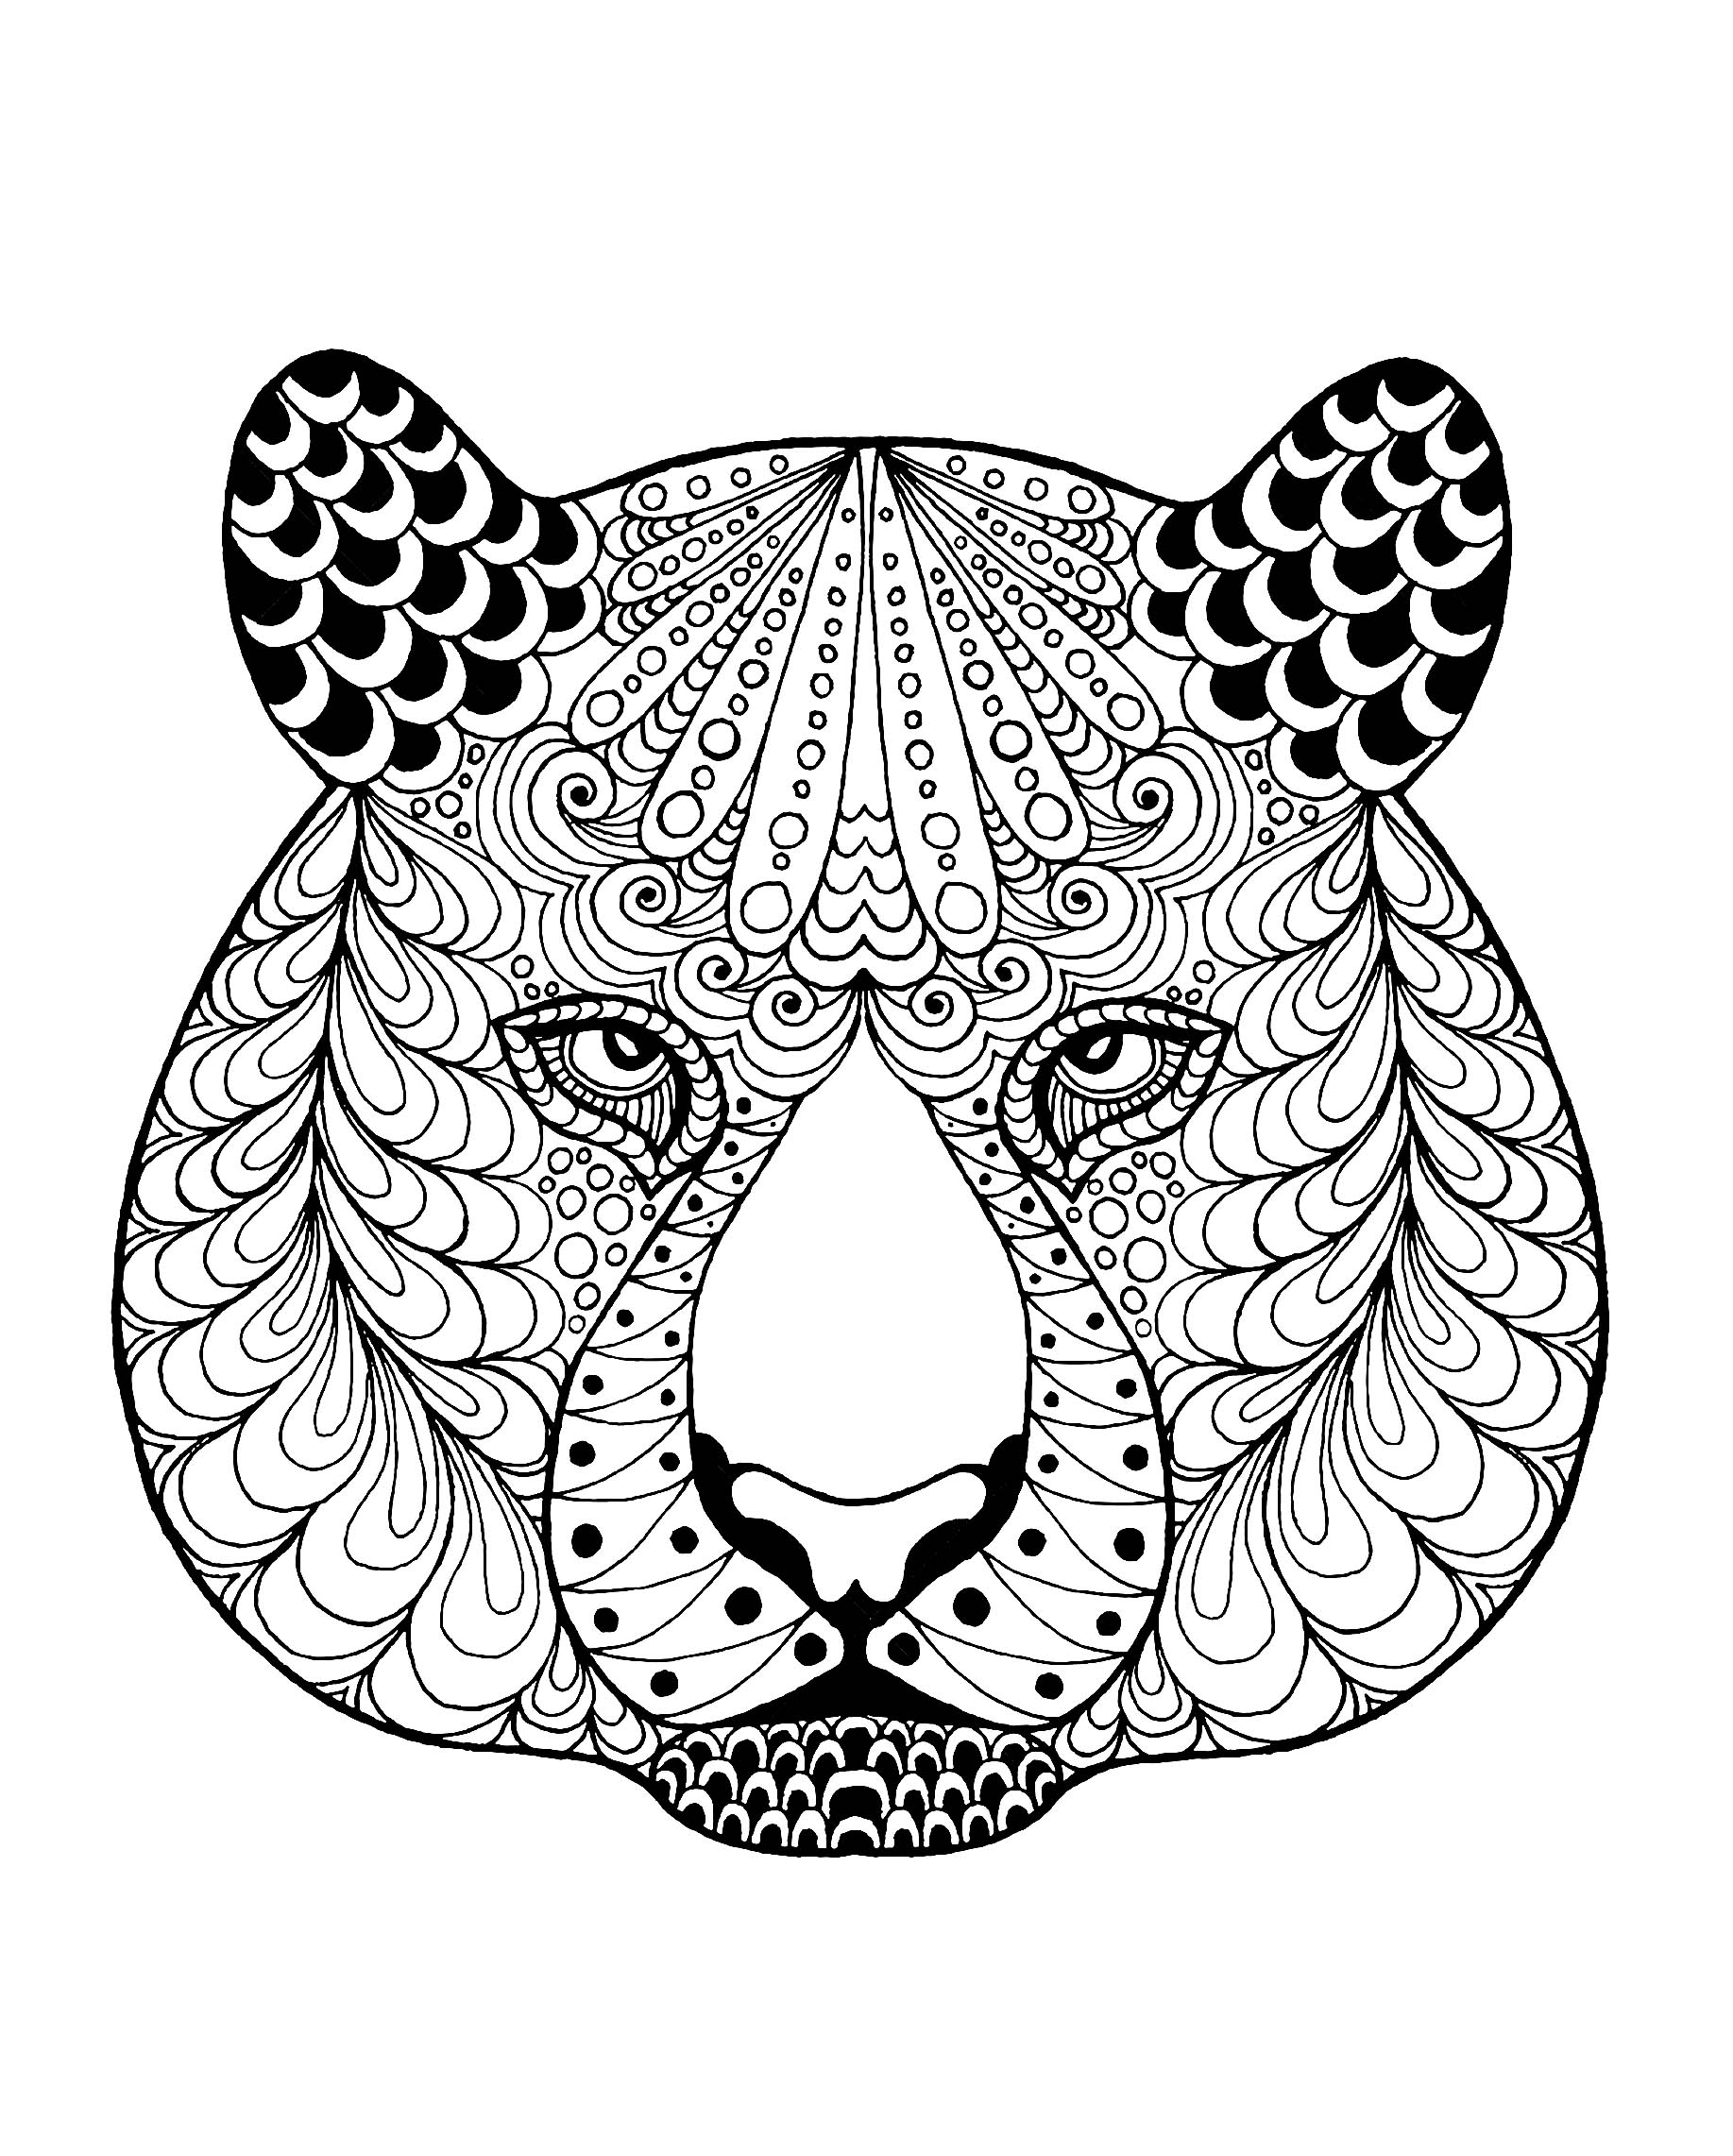 Tiger head with patterns - Tigers Adult Coloring Pages